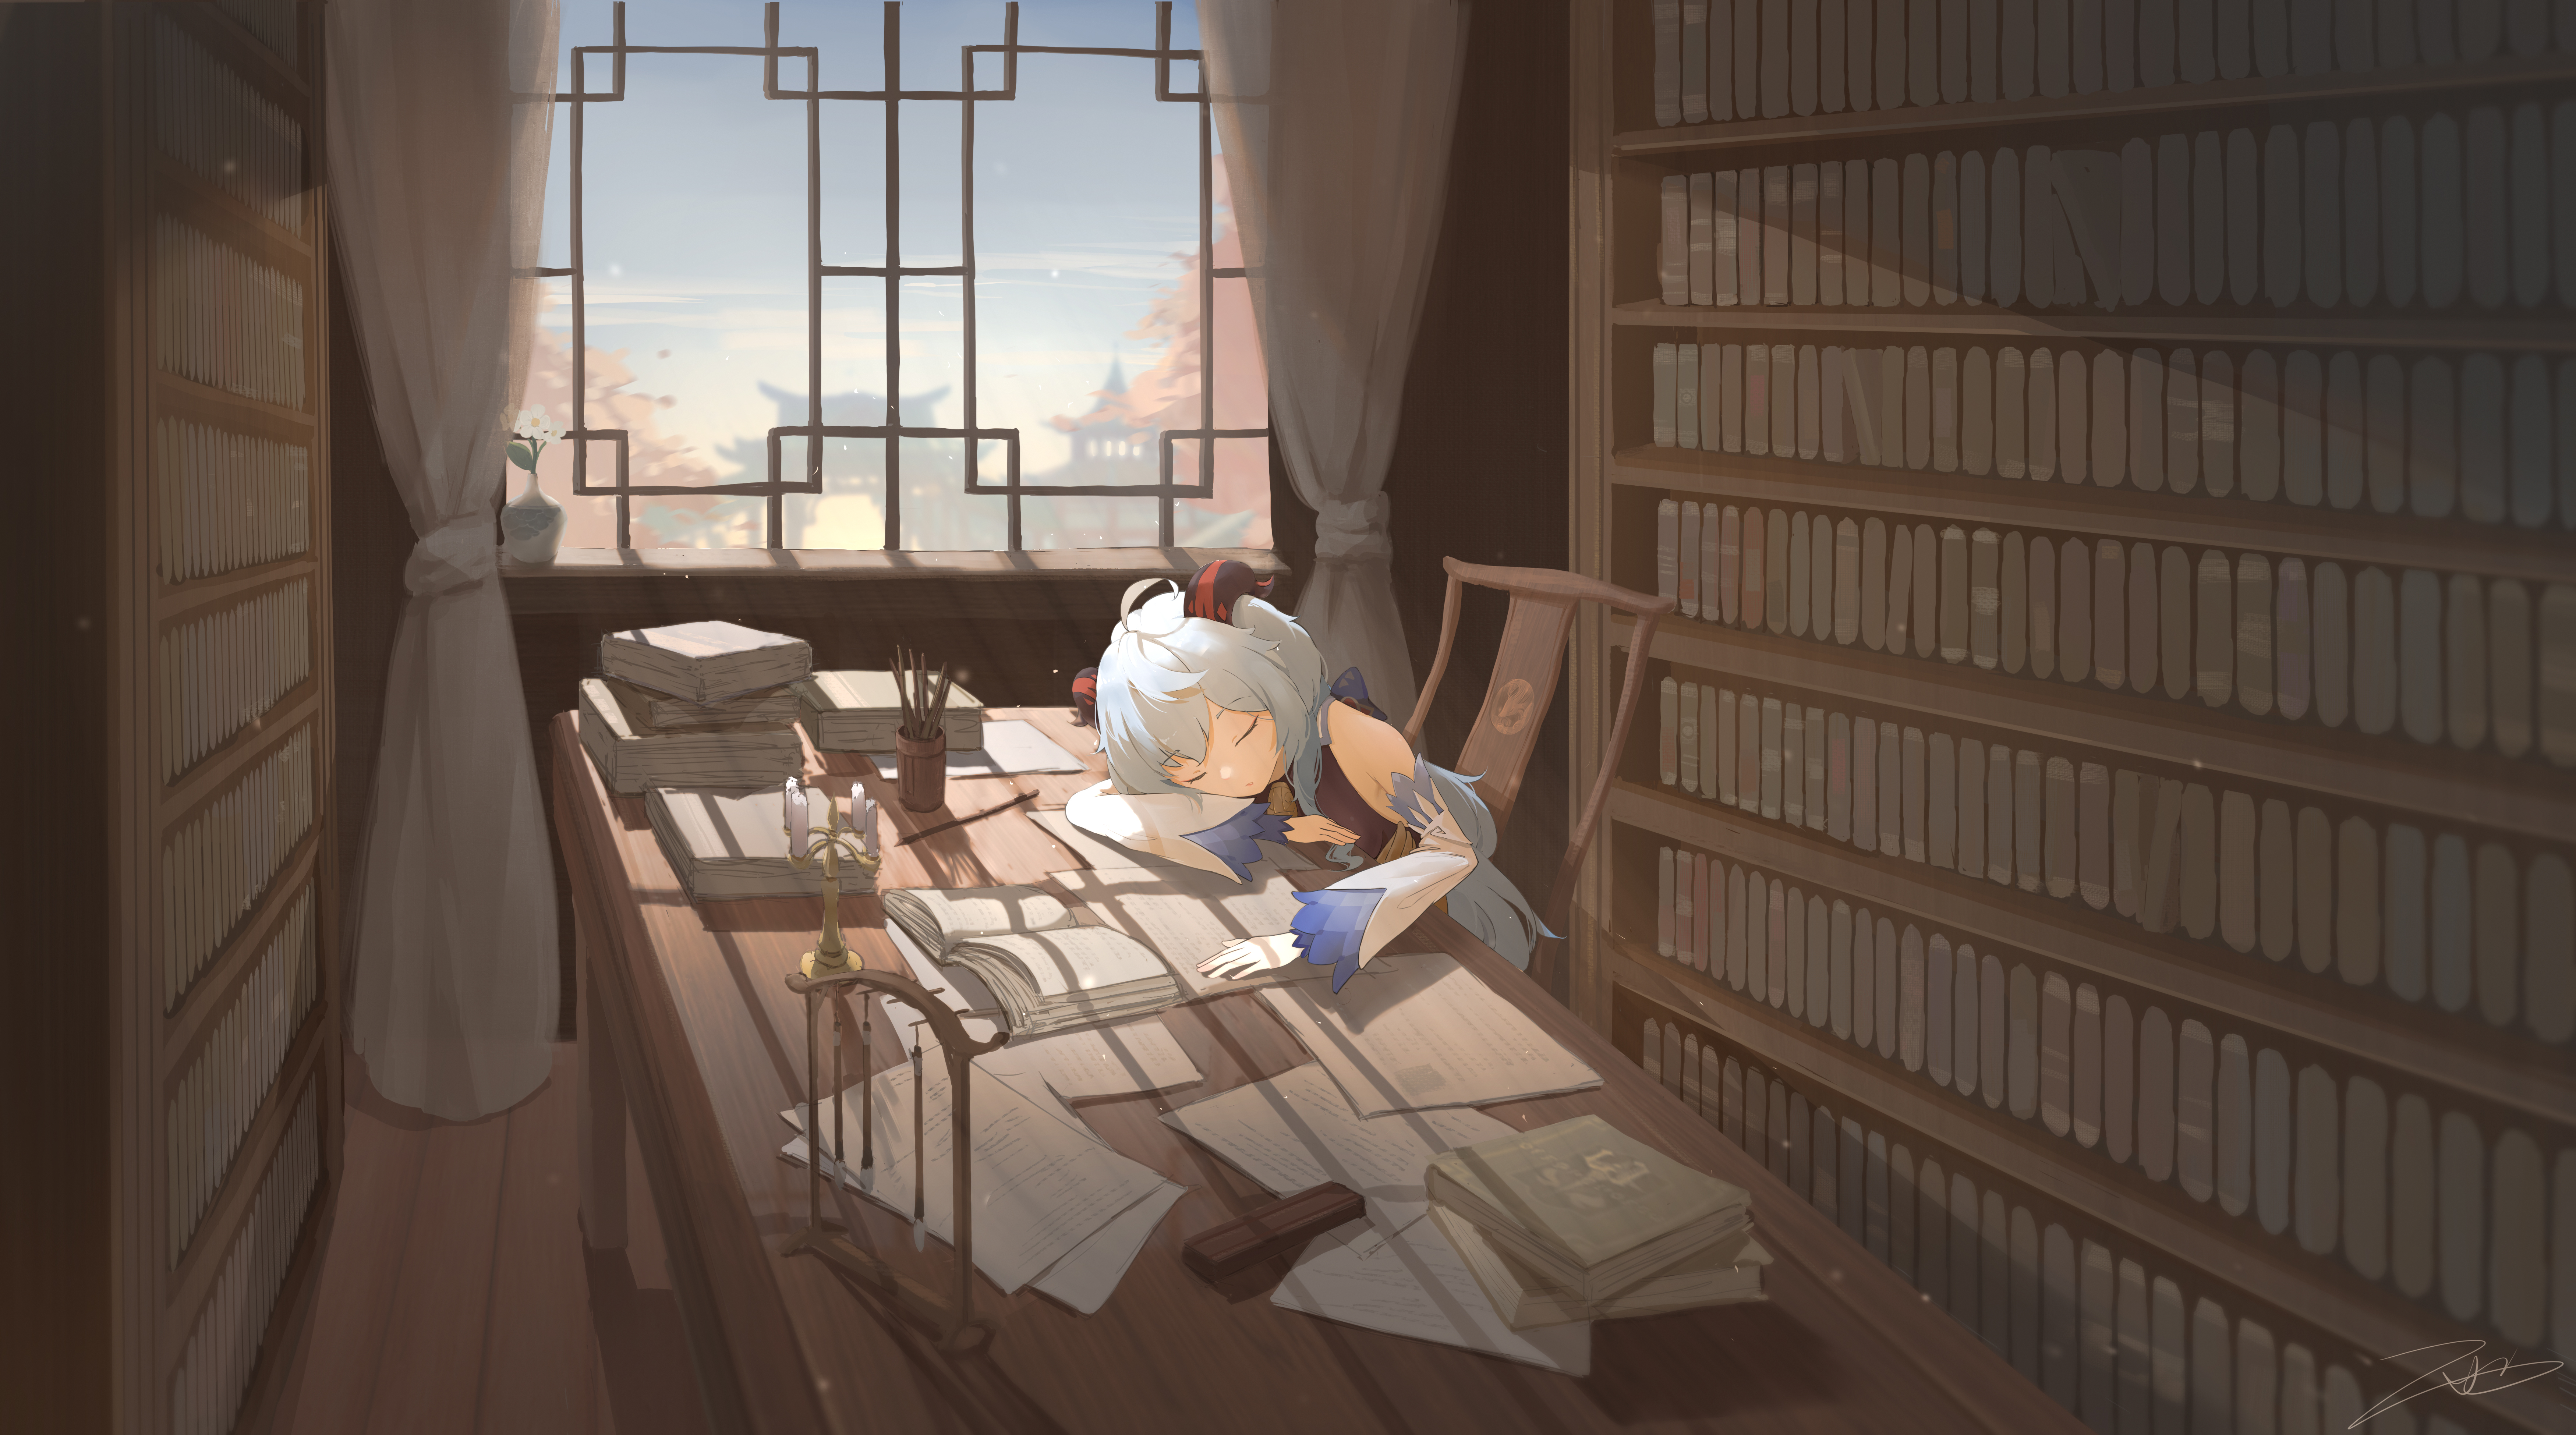 Ganyu taking a nap in the library by 雨様